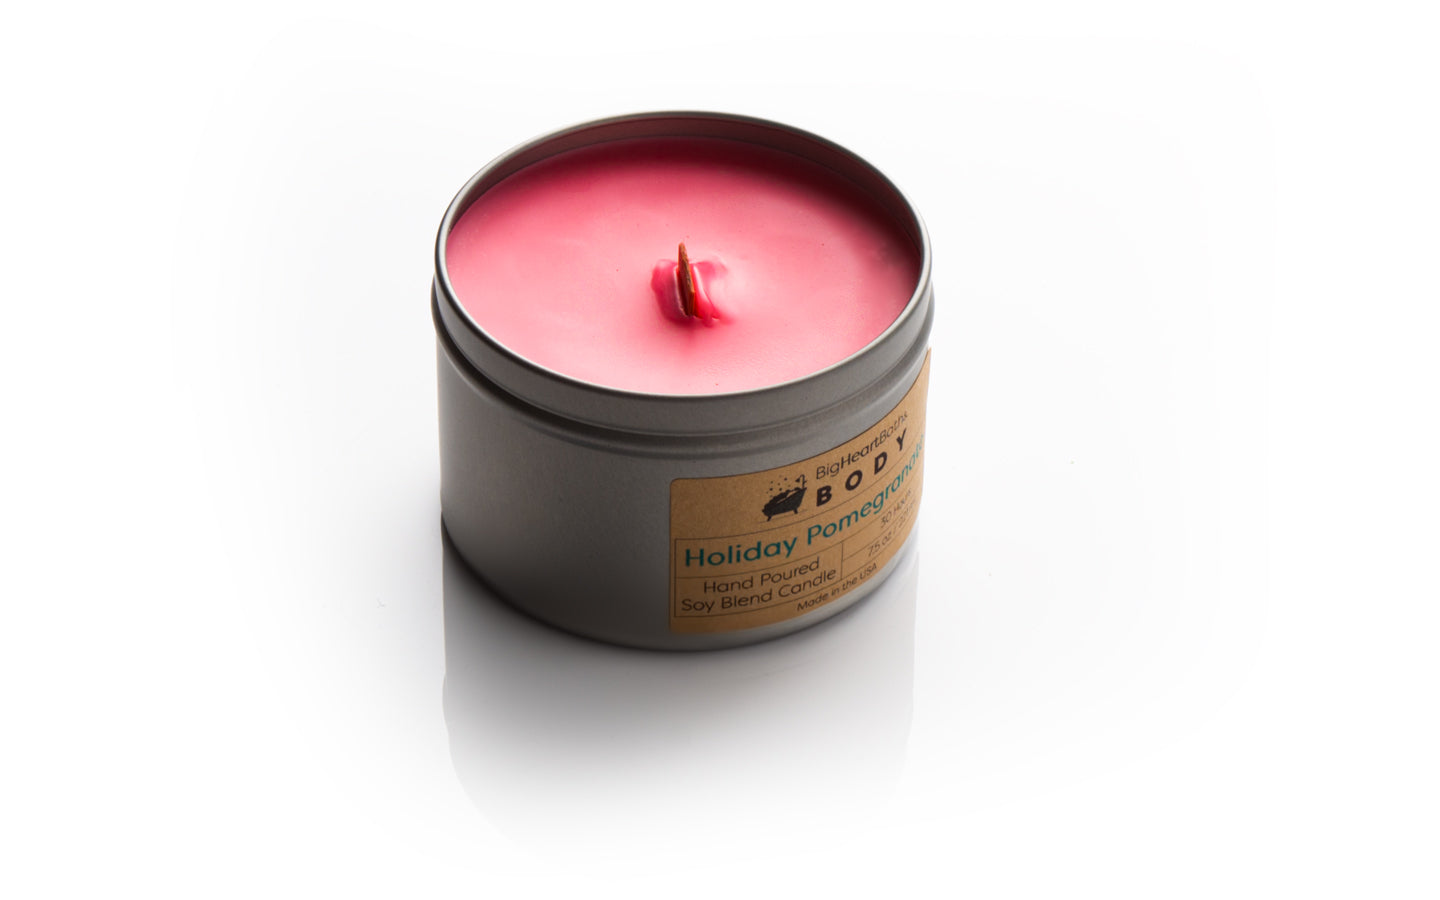 candle, wood wick candle, wooden wick candle, wood wick, scented candle, pomegranate candle, holiday pomegranate candle, soy candle, clean burn candle